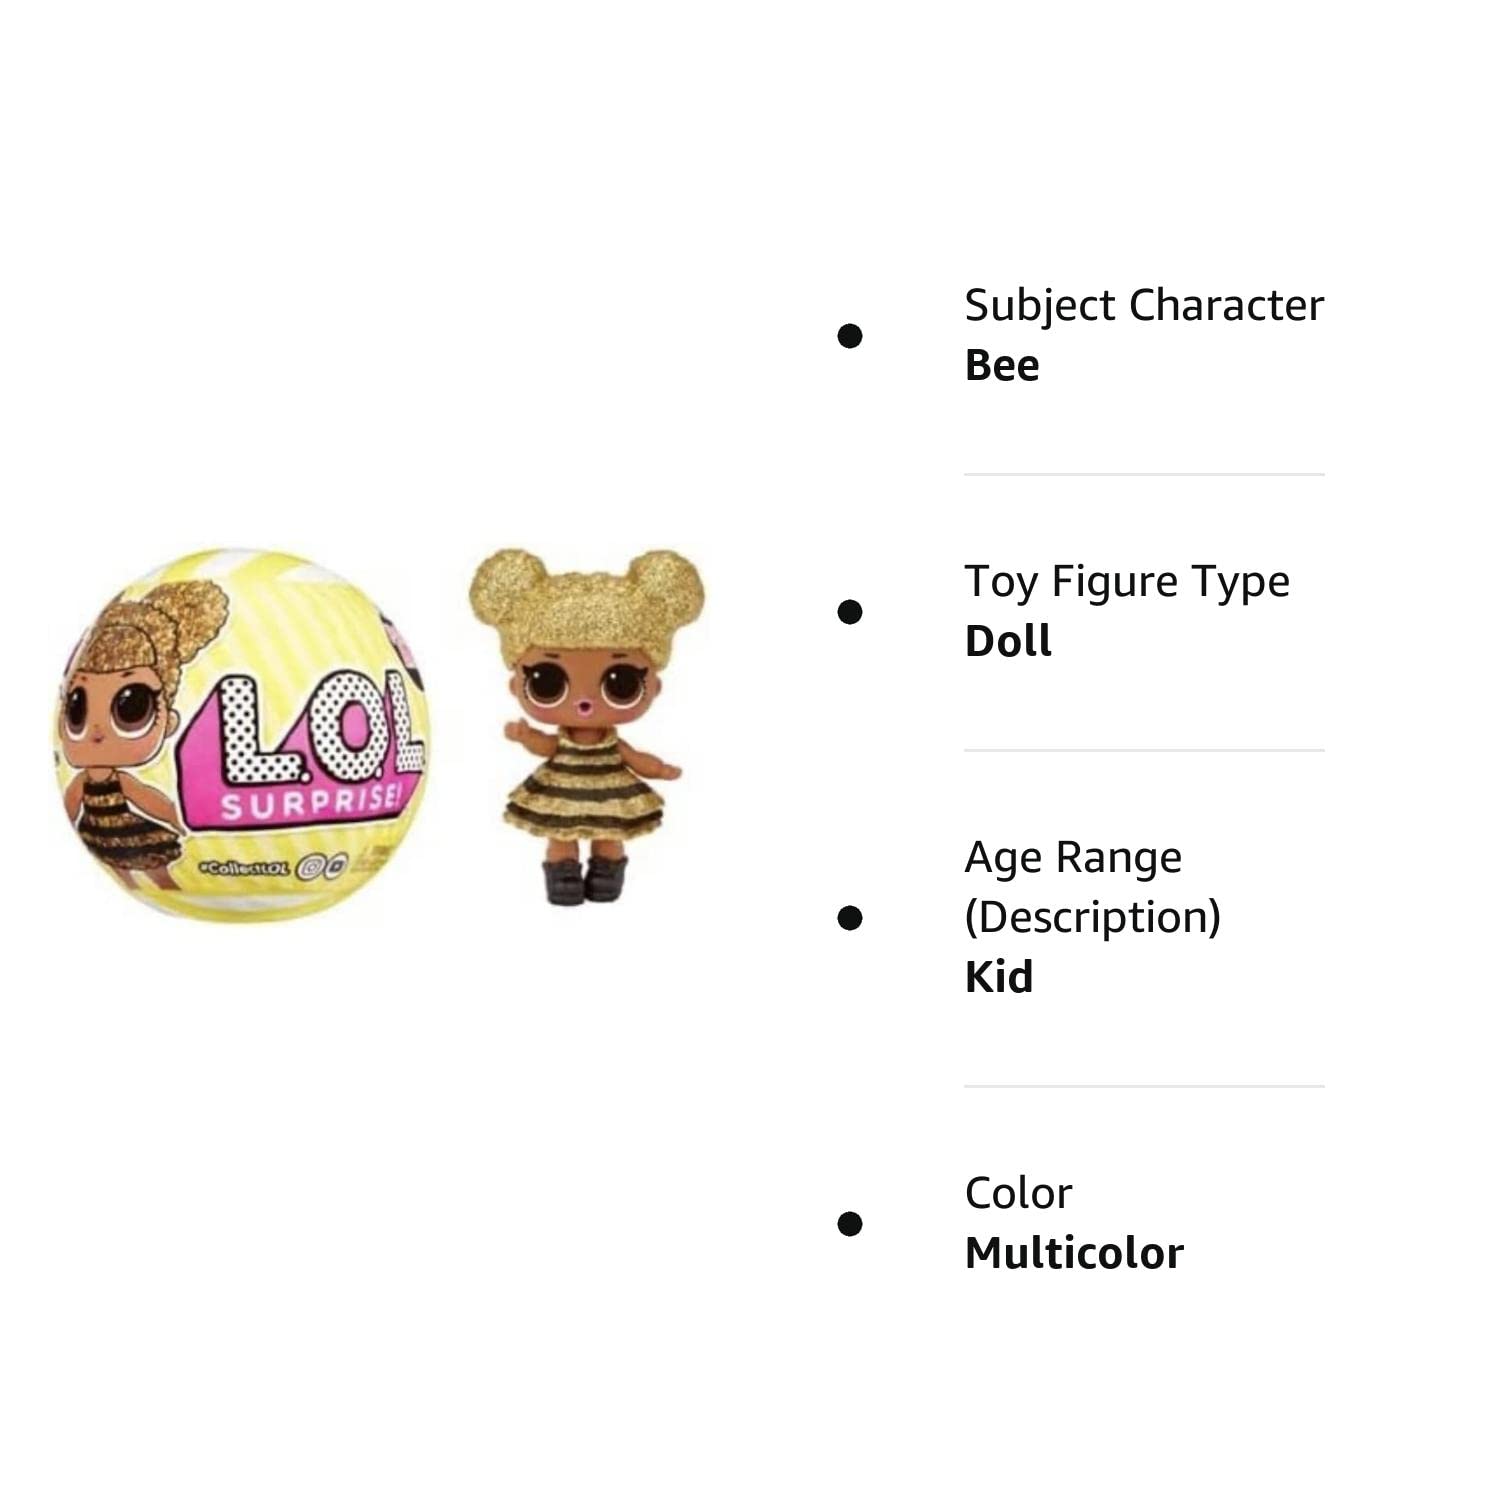 L.O.L. Surprise! 707 Queen Bee Doll with 7 Surprises in Paper Ball- Collectible Doll w/Water Surprise & Fashion Accessories, Holiday Toy, Great Gift for Kids Ages 4 5 6+ Years Old & Collectors